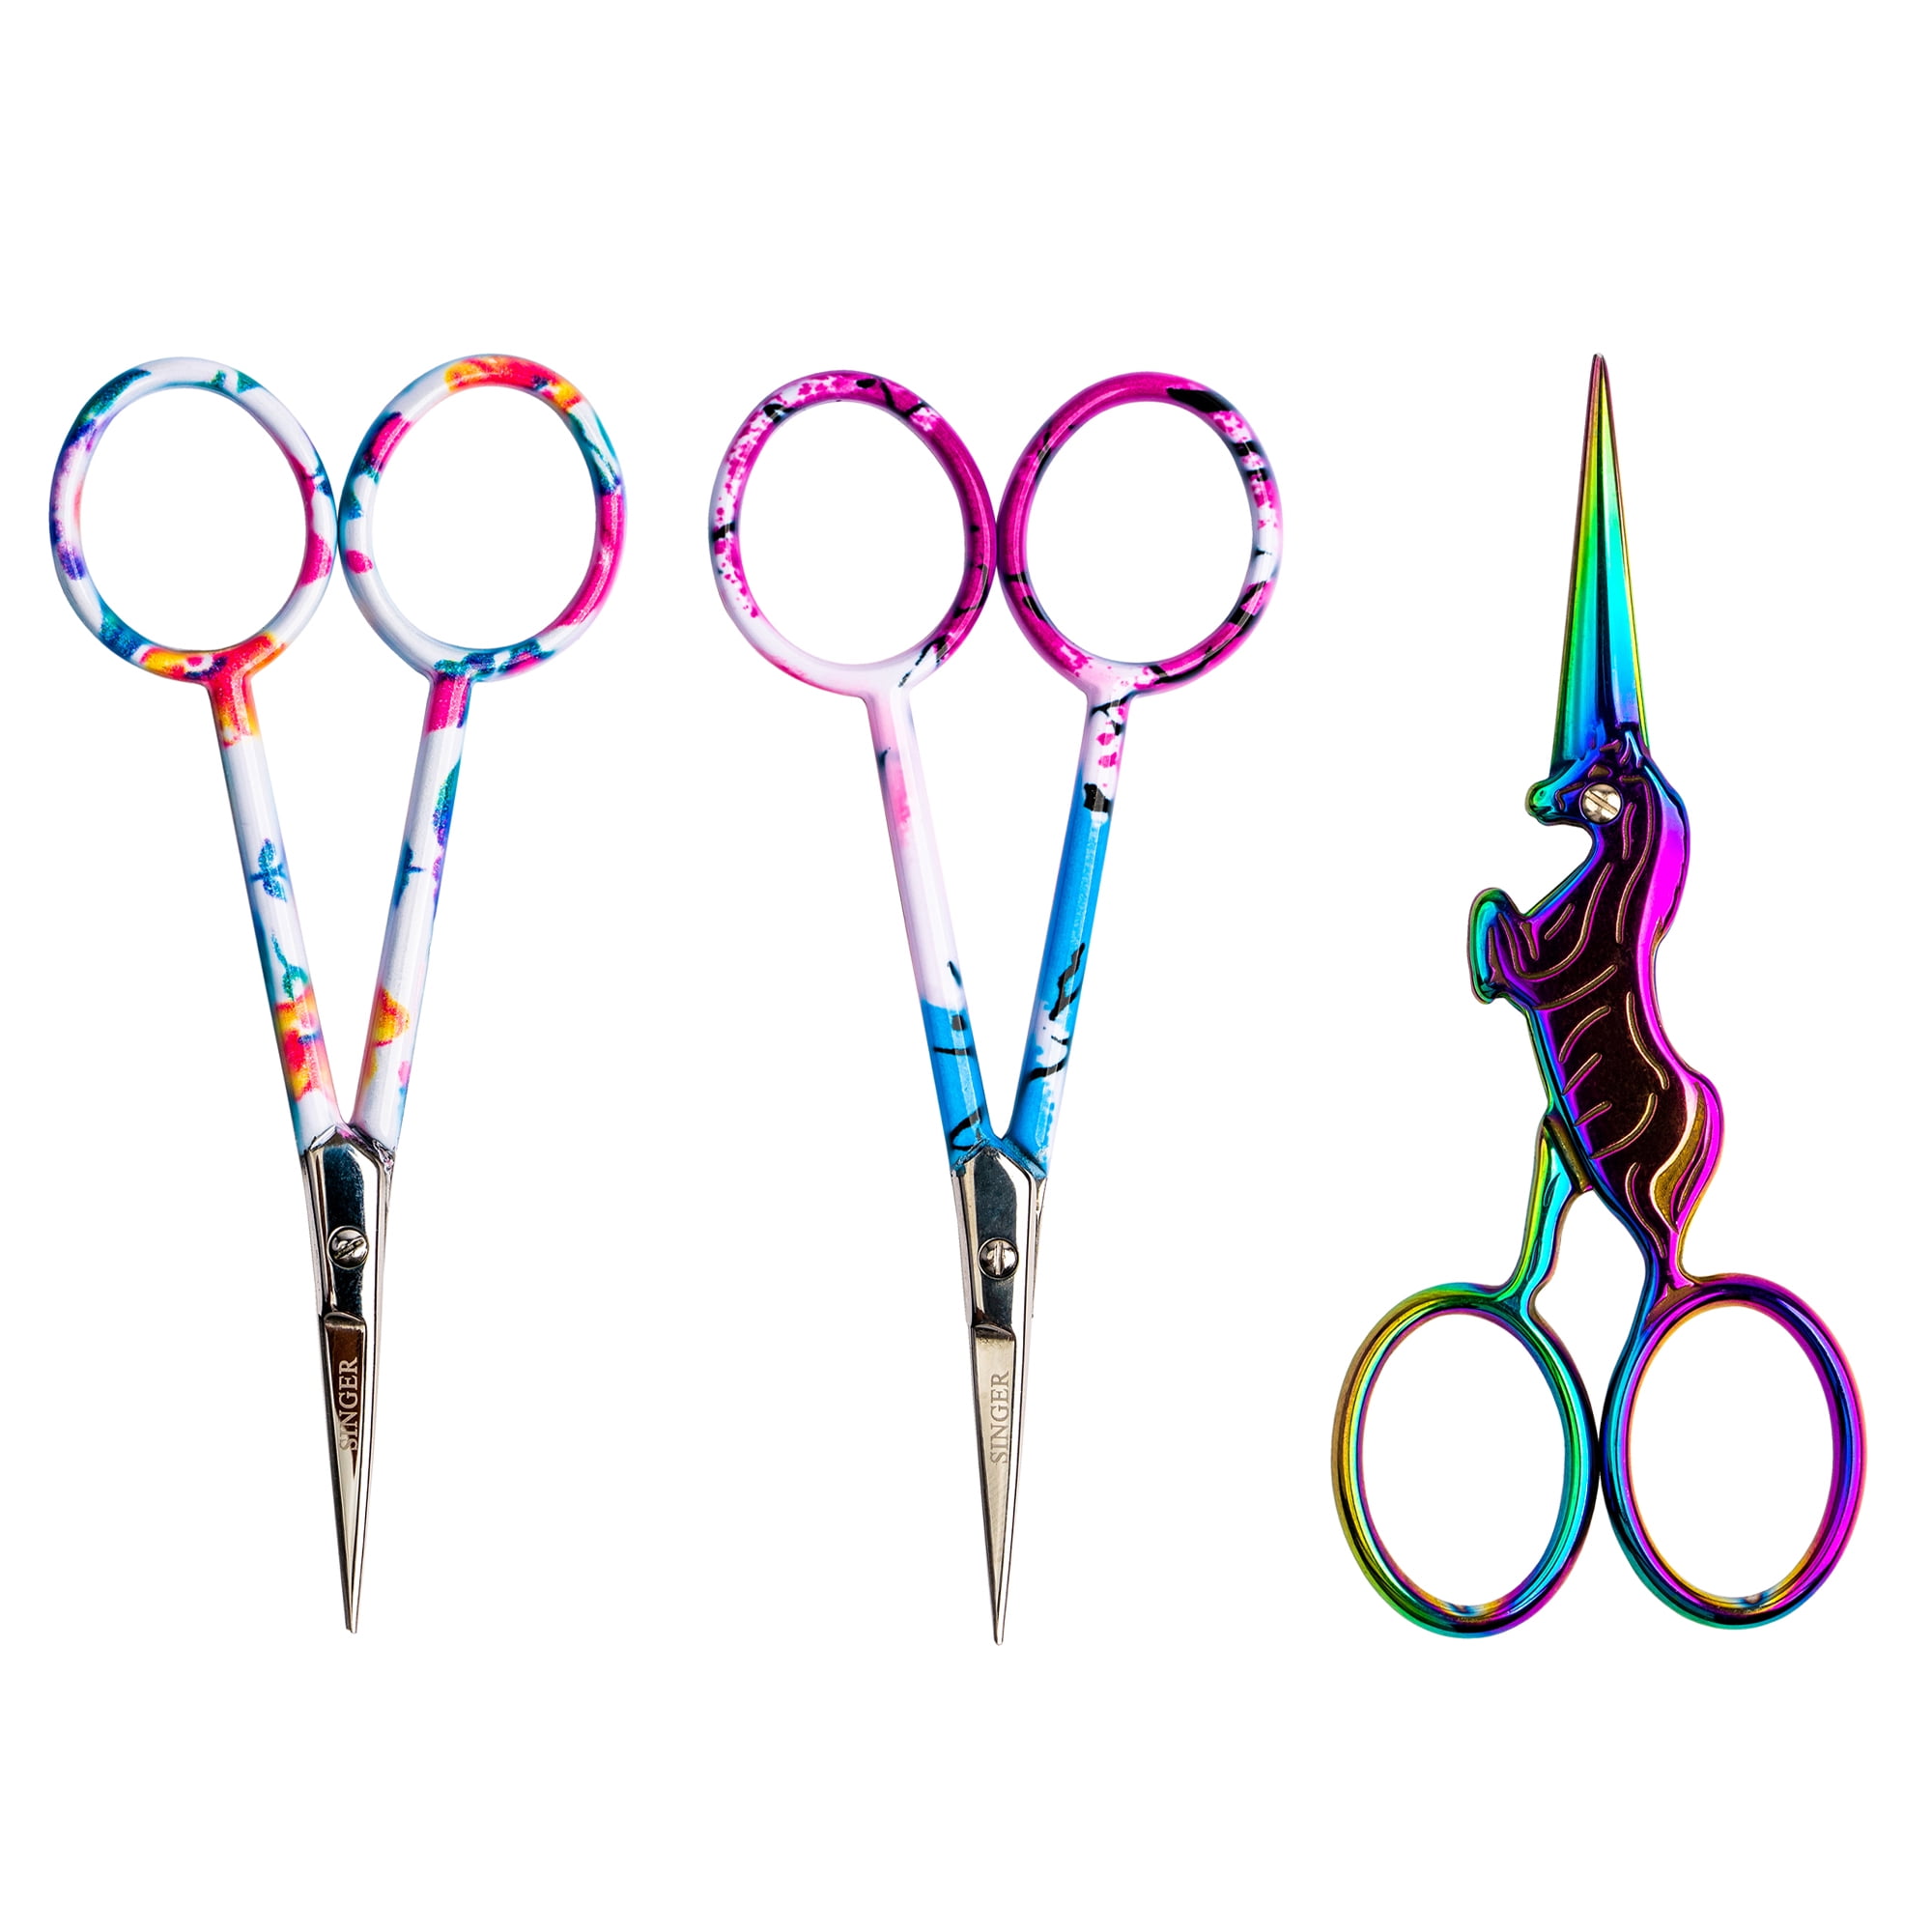 Singer Set Of 3 4 Forged Embroidery Scissors With Pastel Printed